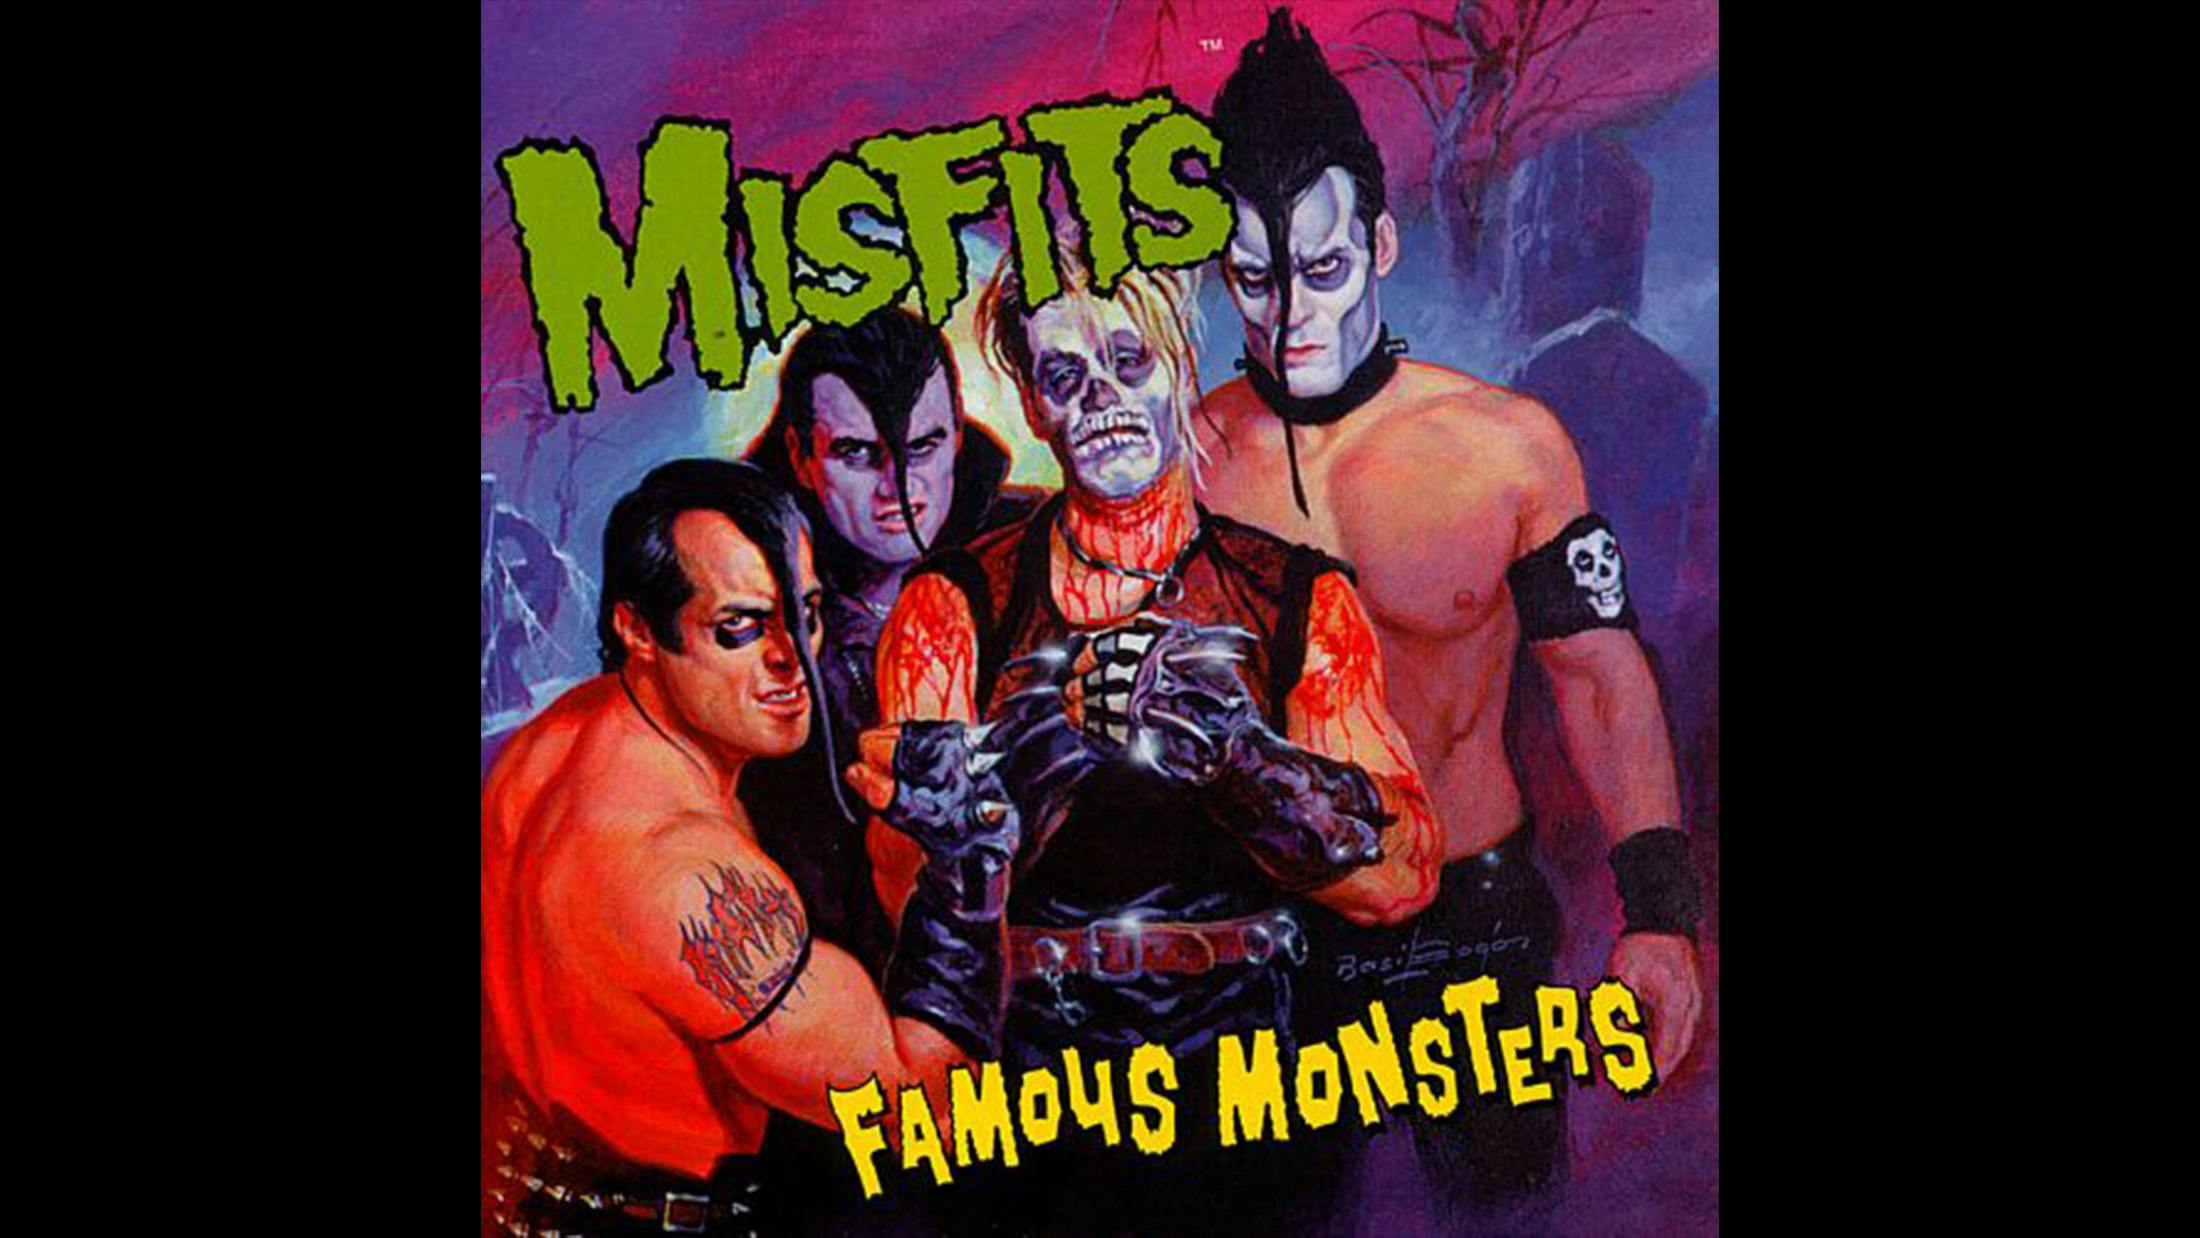 Though Misfits 2.0 will never boast the same cachet as their initial Glenn Danzig-fronted incarnation, this horror-punk gem is often unfairly overlooked simply because of his absence. Michale Graves does a mighty fine job of filling those boots, with a range of vocals that allows the quartet – still featuring founding bassist Jerry Only – to dip toes into doo wop and rockabilly waters, having a lot more fun in the process, while maintaining the same gothic edge that first made their name.